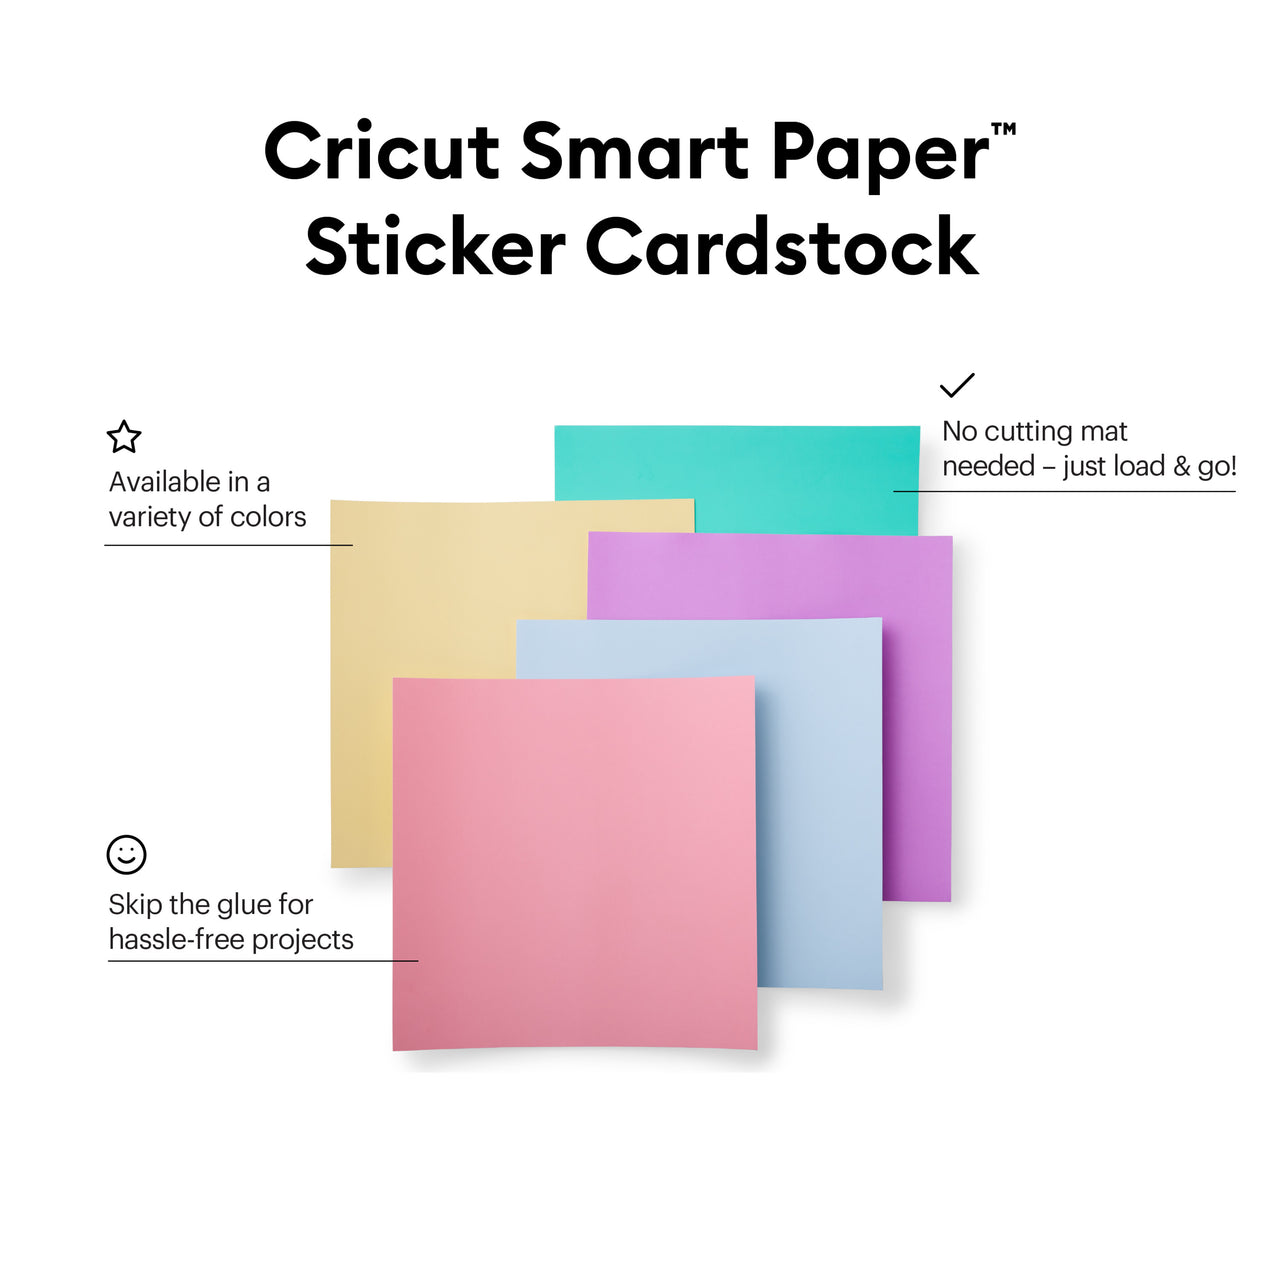 Cricut Smart Paper Sticker Cardstock Black, White, and Pastels Bundle 10 Sheets - 13in x 13in - Adhesive Paper for Stickers